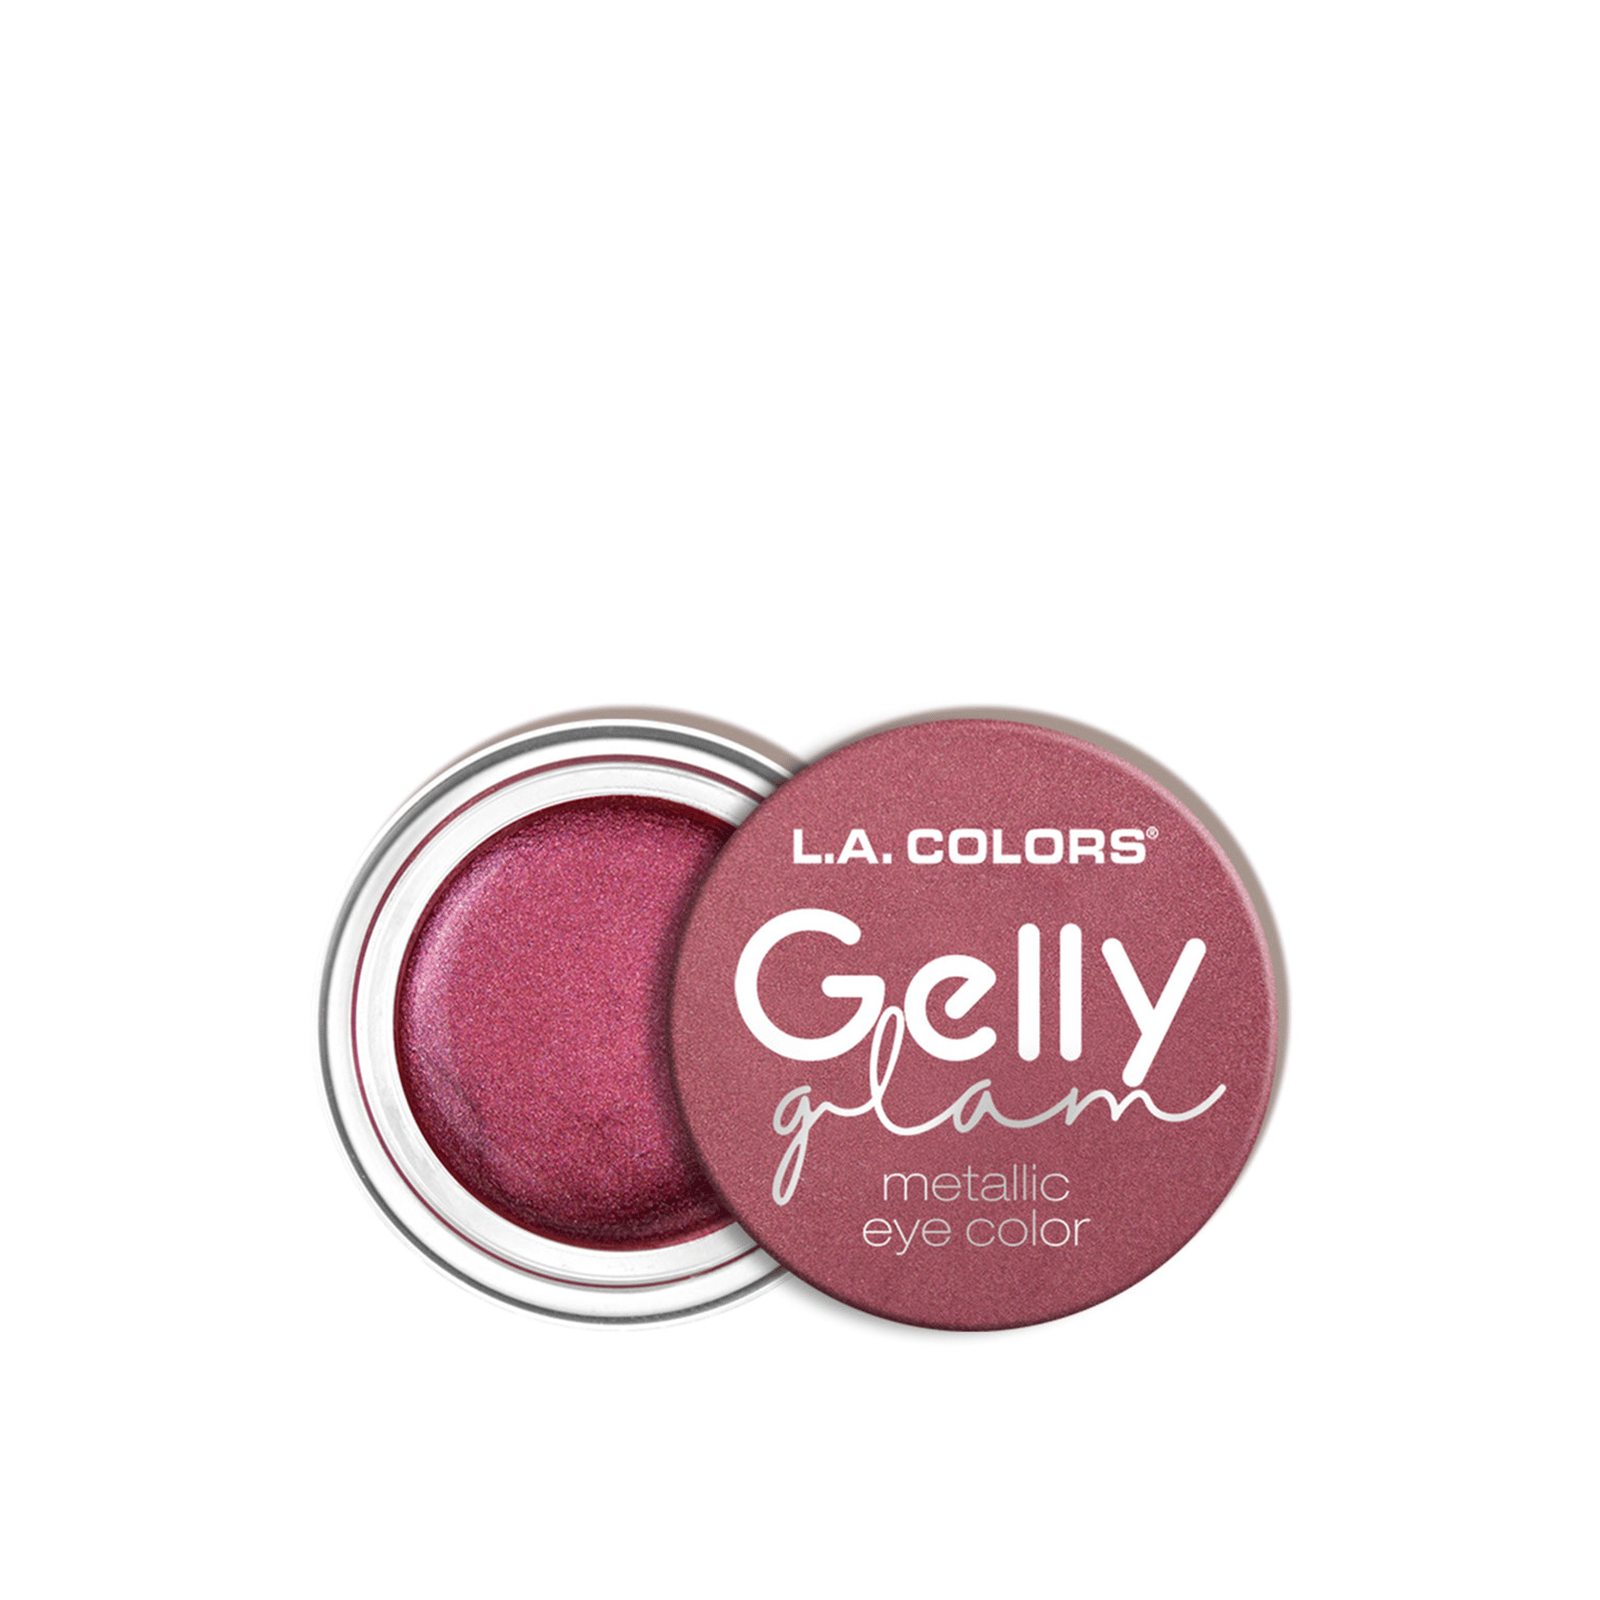 L.A Colors Gelly Glam Metallic Eye Color CES286 Sizzle 5ml